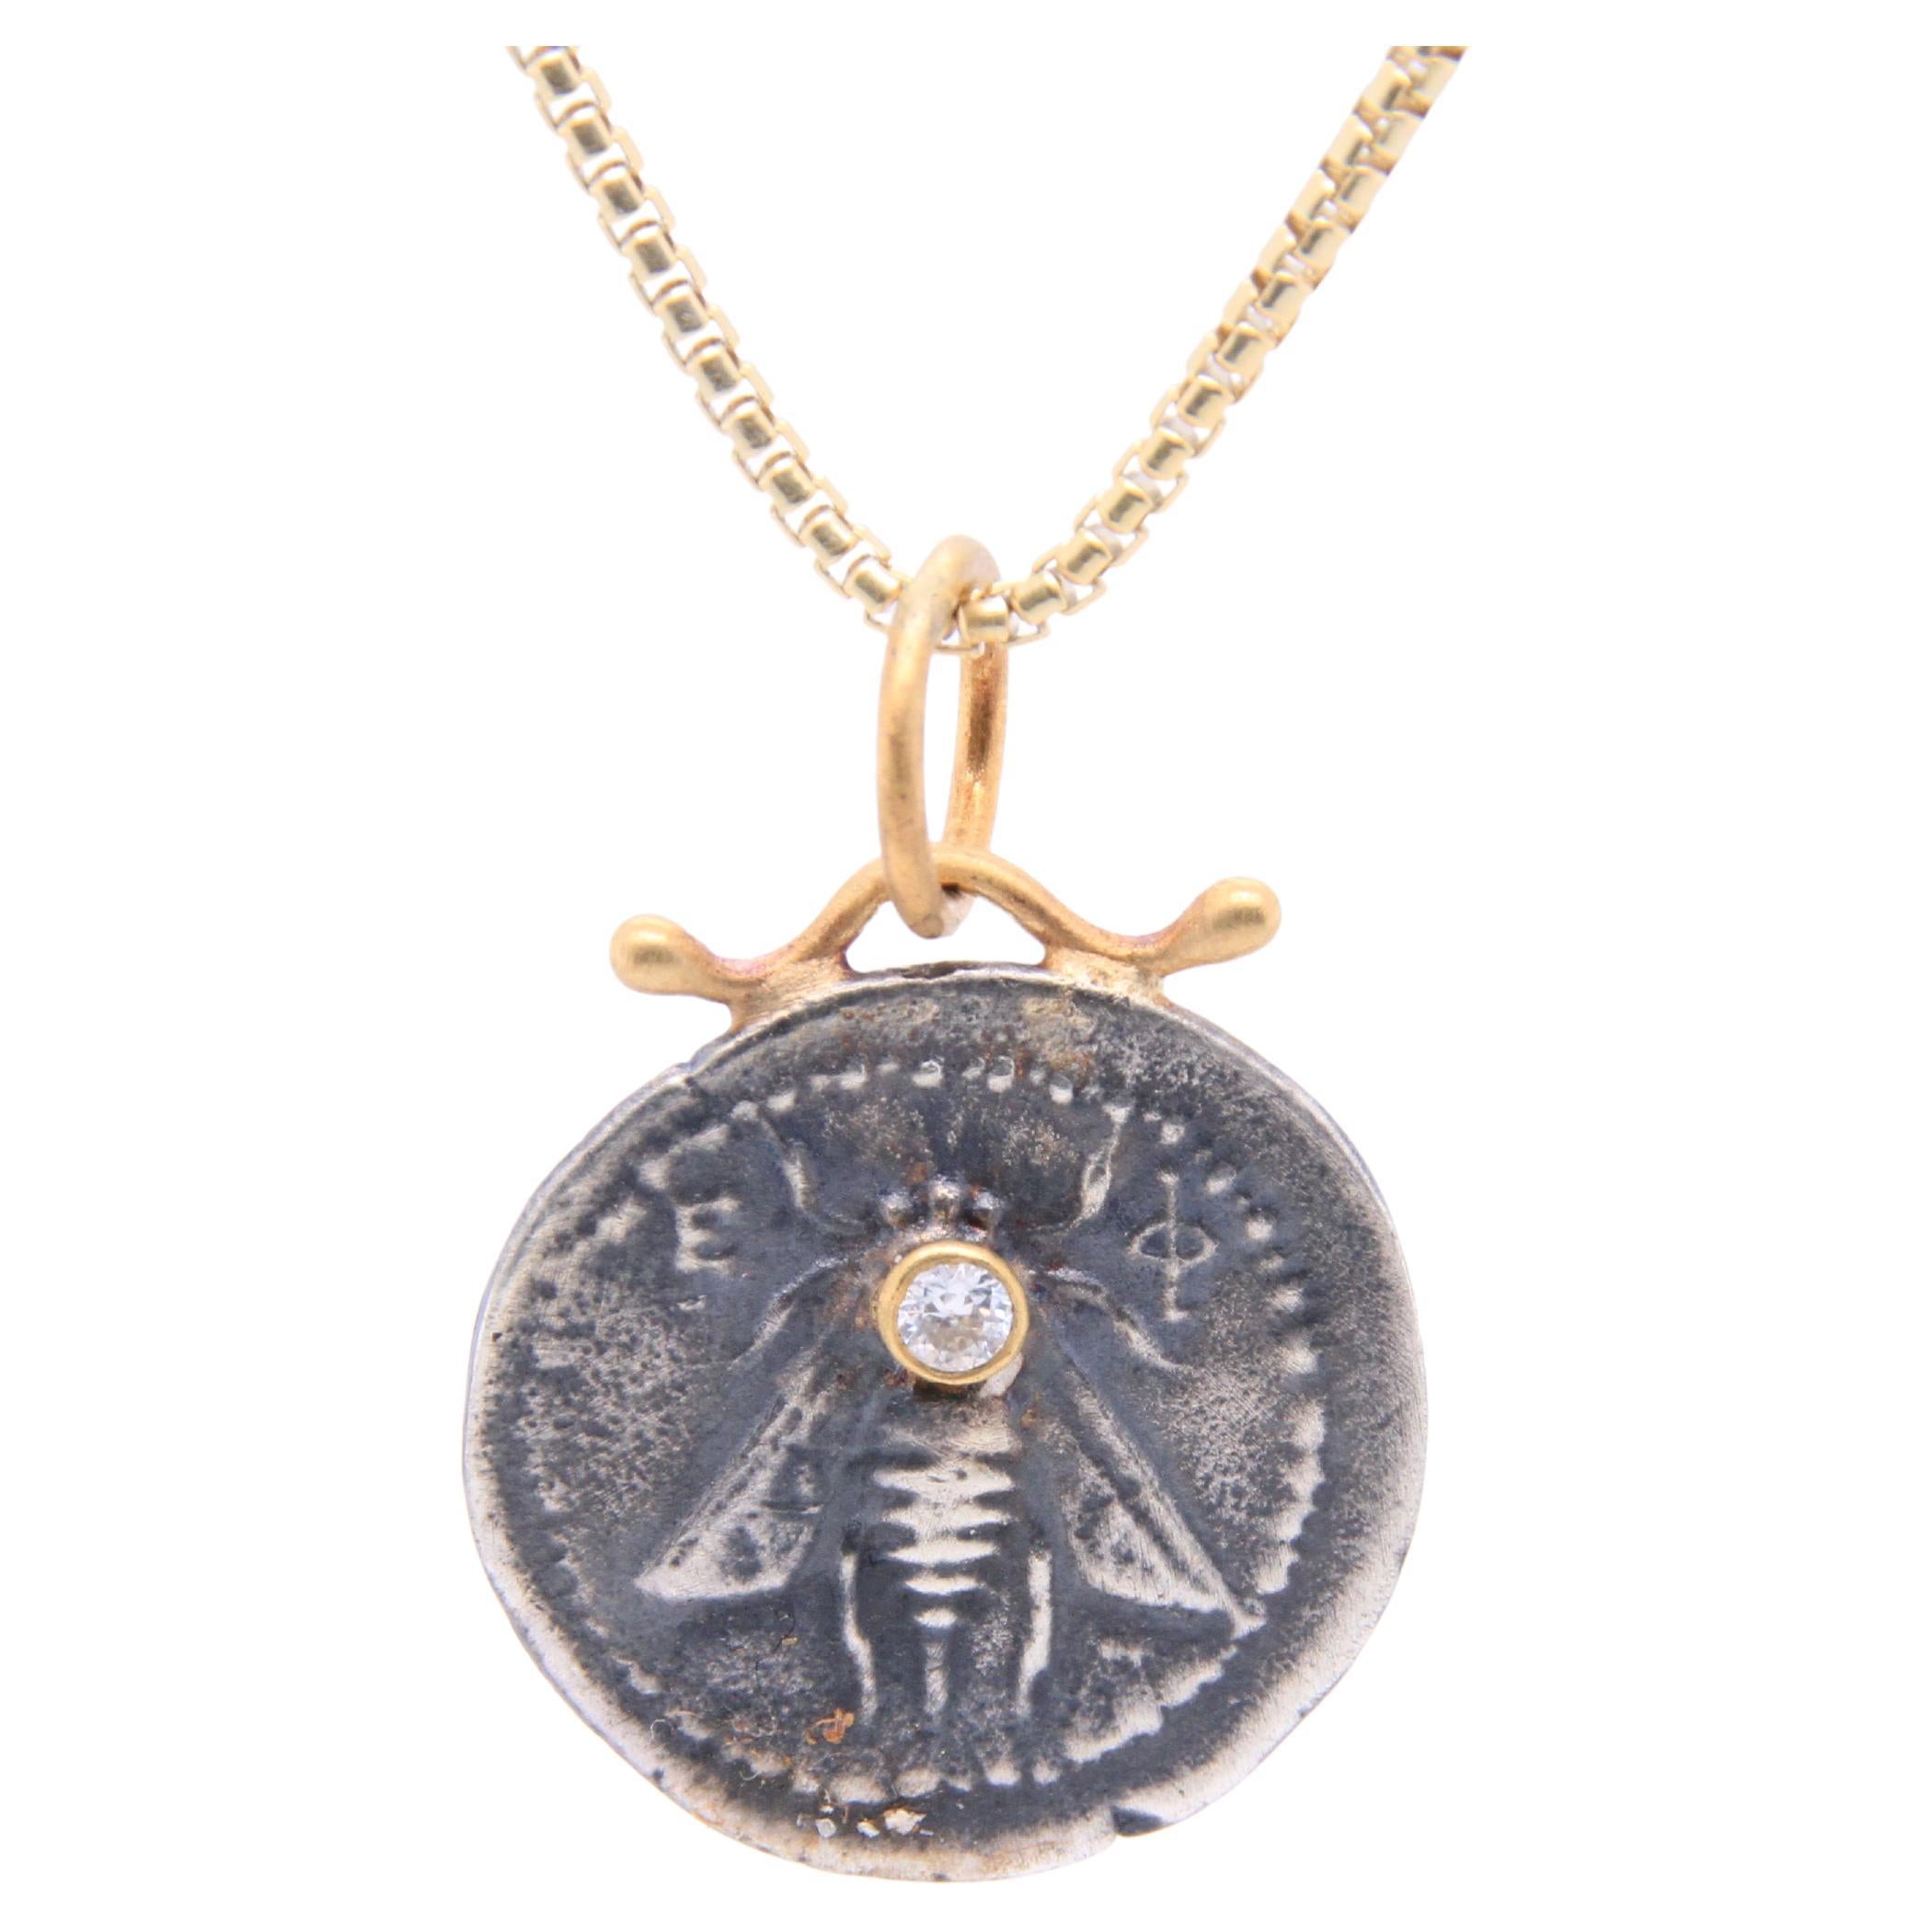 Round Cut Bee Coin Amulet with Diamond, 24kt Gold and Silver, Pendant Necklace from Turkey